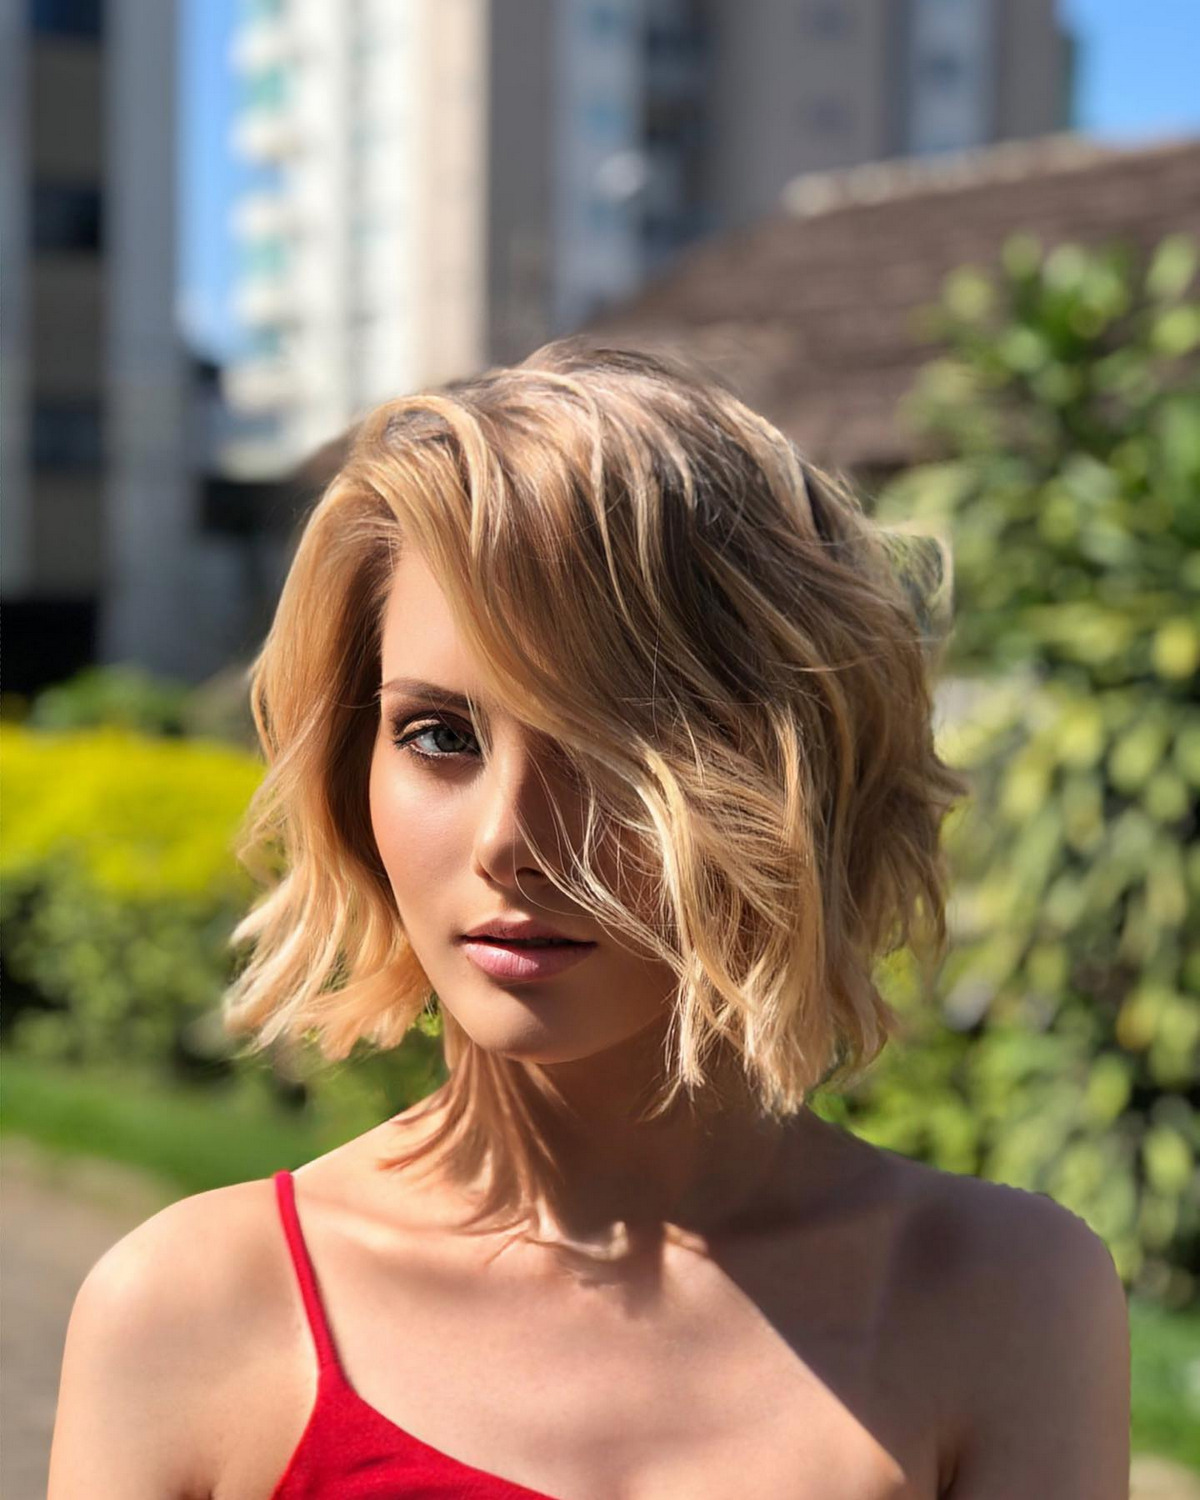 Short Blonde Hair With Textured Waves